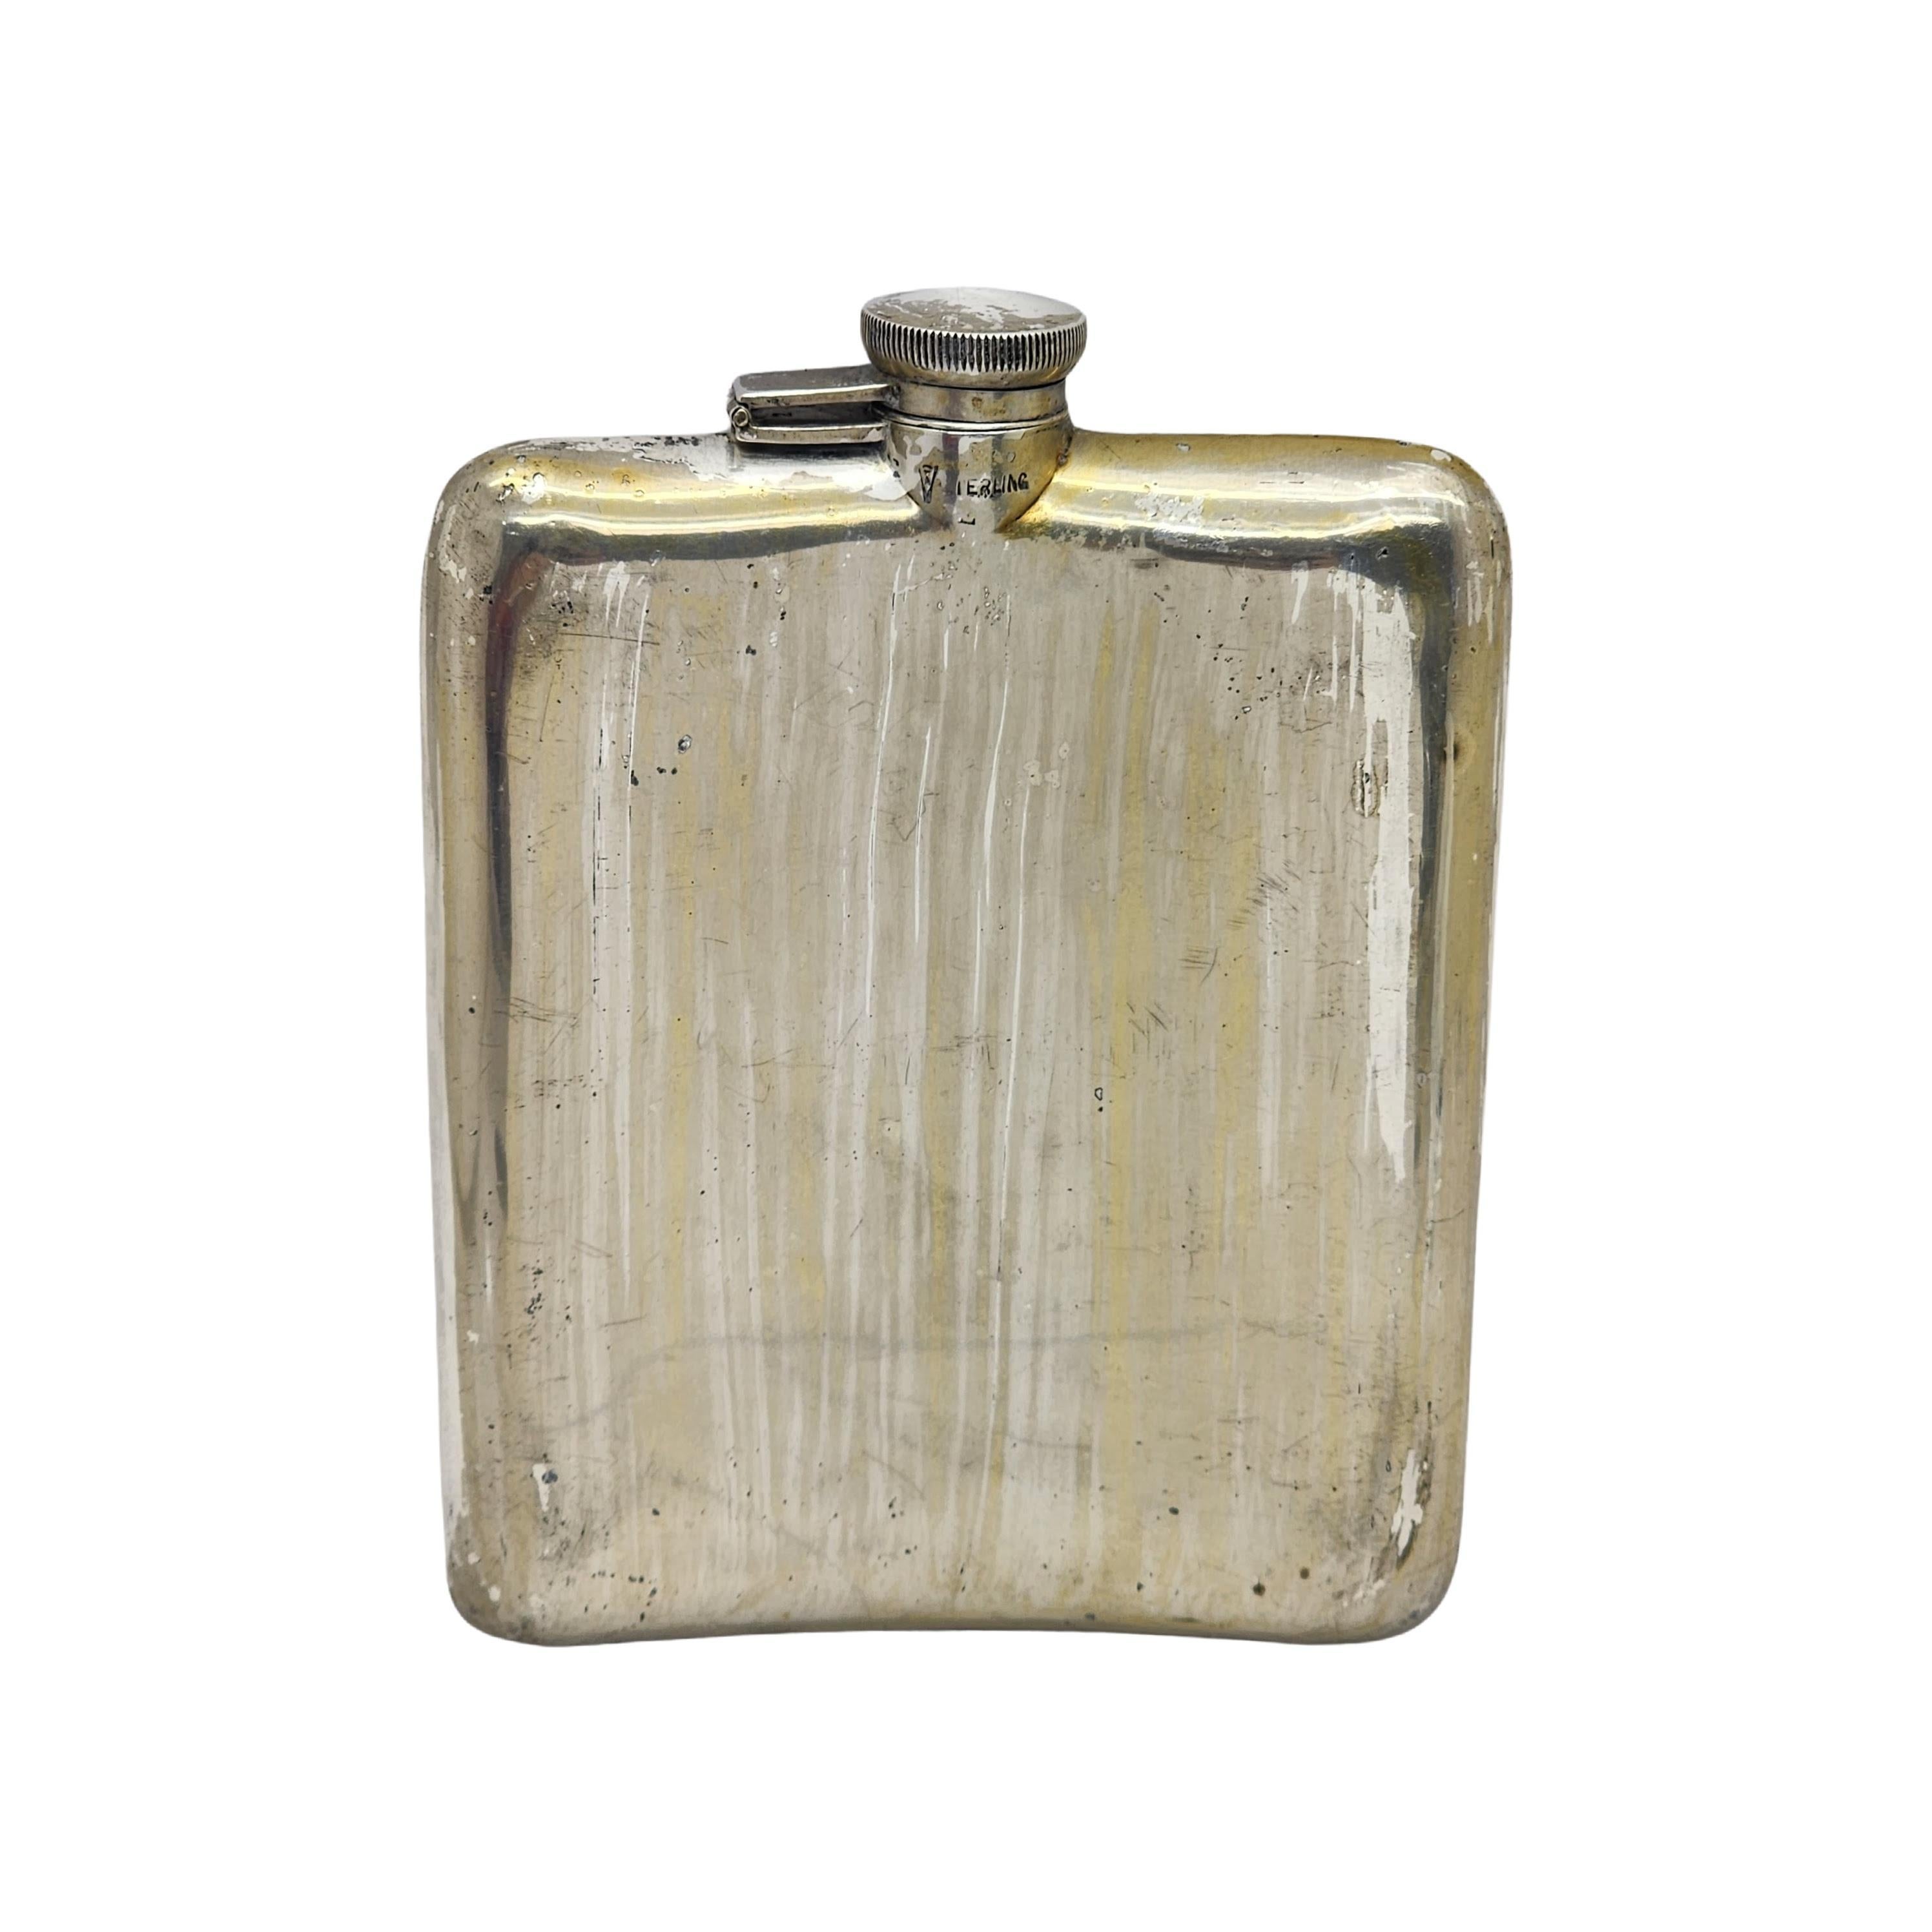 Sterling silver and black enamel hip flask by Clarence A. Vanderbilt with monogram.

Monogram appears to be ETRW

Curved hip flask featuring etched stripes with black enamel accents and a screw top with original inner cork.

Measures approx  5 1/2